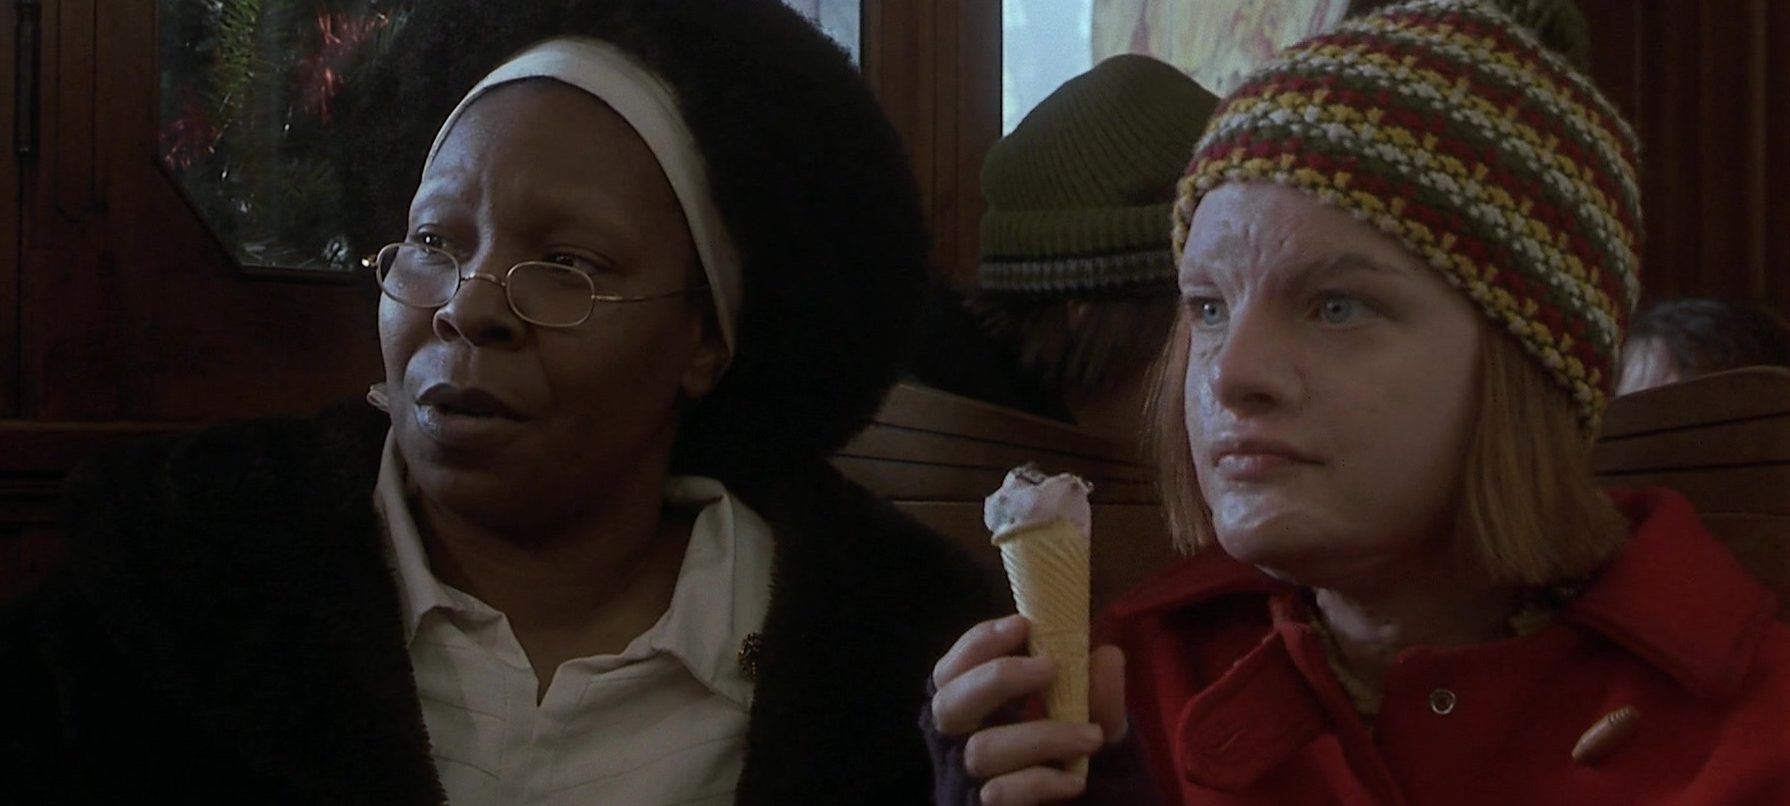 Screen Captures from the 1999 movie “Girl, Interrupted” where Elisabeth pla...